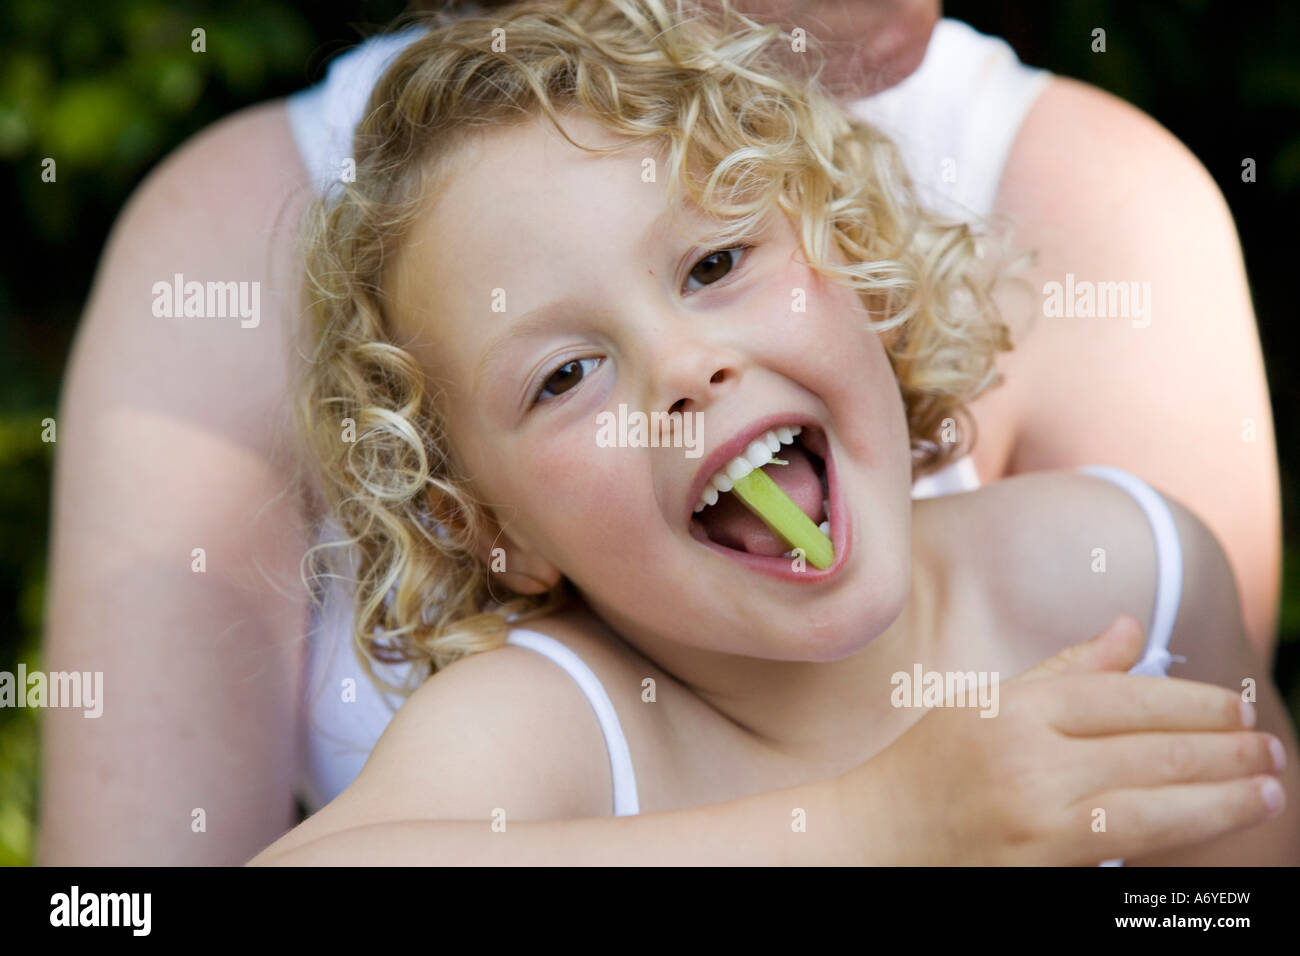 Young girl sitting on her mother s lap with a piece of celery in her mouth Stock Photo